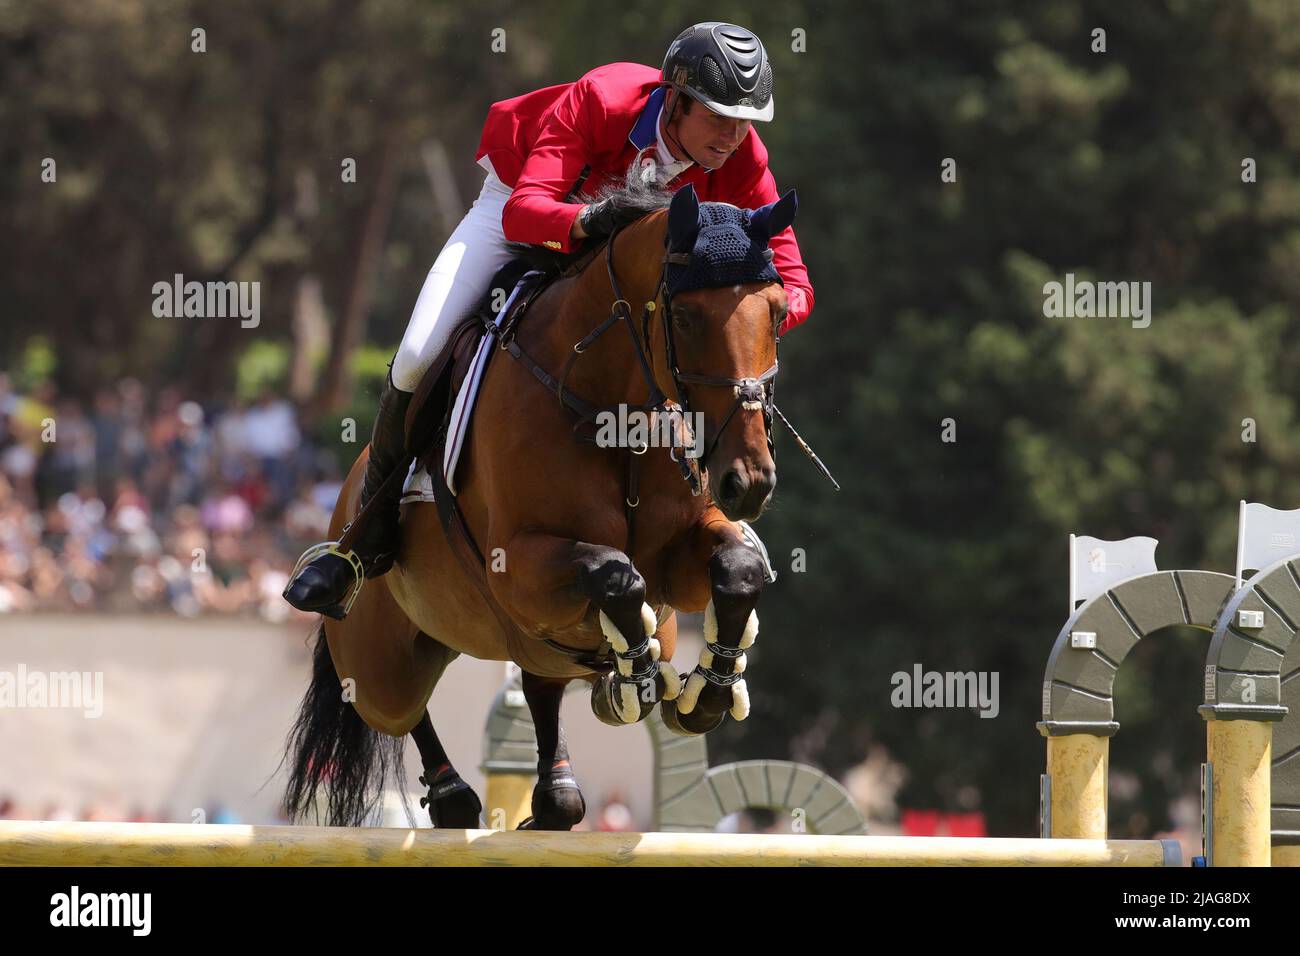 Spencer Smith (USA) on Quibelle  during the CSIO 5* Rome Rolex Grand Prix at Piazza di Siena on May 29, 2022 in Rome, Italy. (Photo by Giuseppe Fama/Pacific Press/Sipa USA) Stock Photo